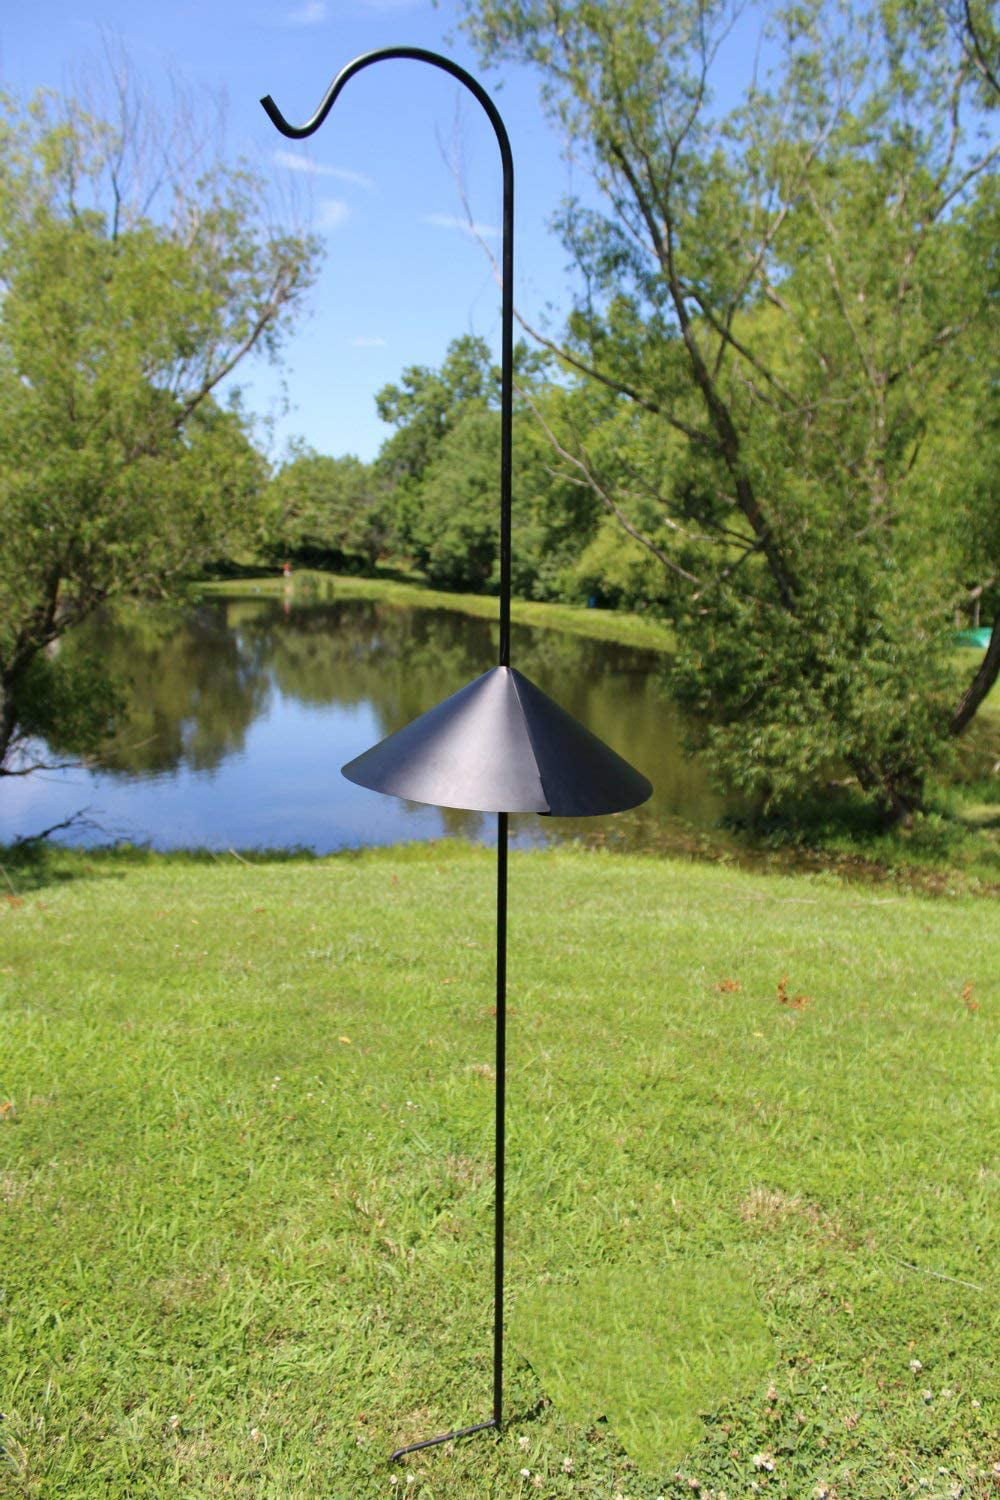 Bird Feeders & More Hanging Plant Baskets 15MM Thick 2, Black Super Strong Solar Lights Rust Resistant Steel Hook Ideal for Use at Weddings Lanterns Ashman Black Shepherd Hook 92 Inch 